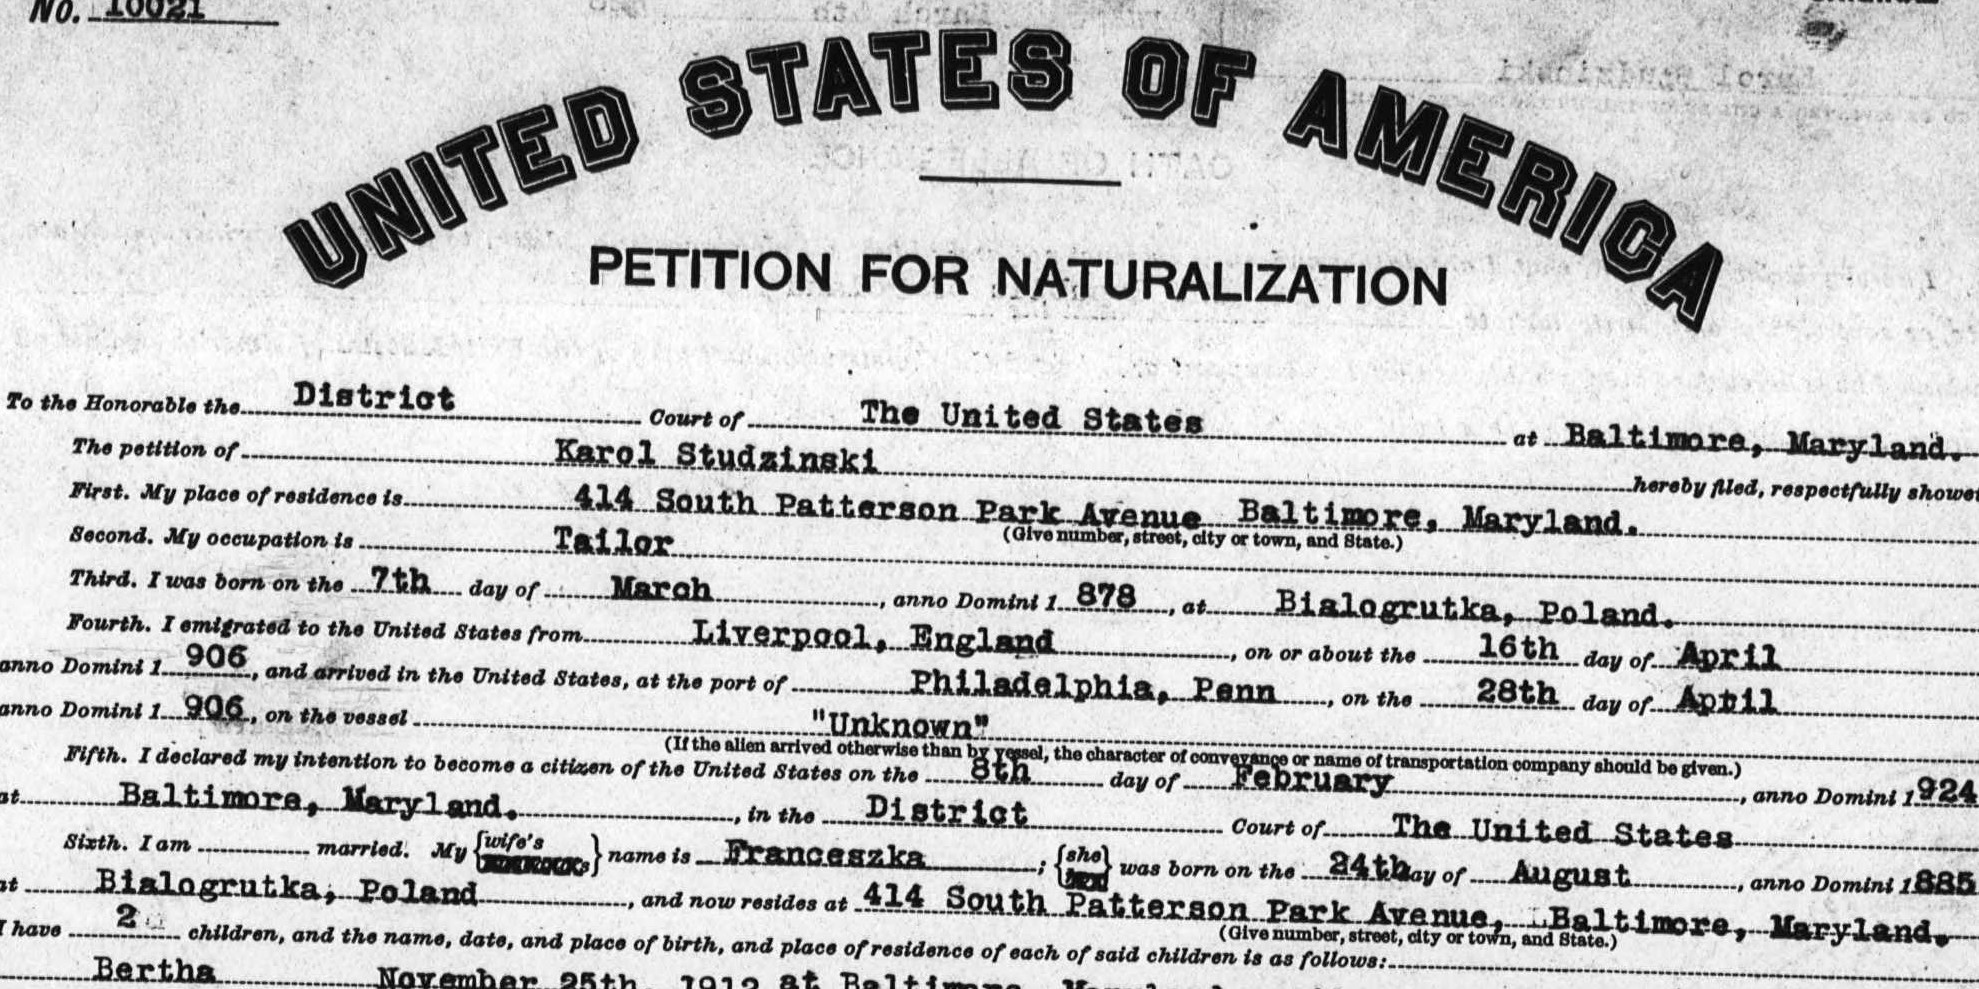 We are a nation of immigrants. My great-grandfather's petition for naturalization.